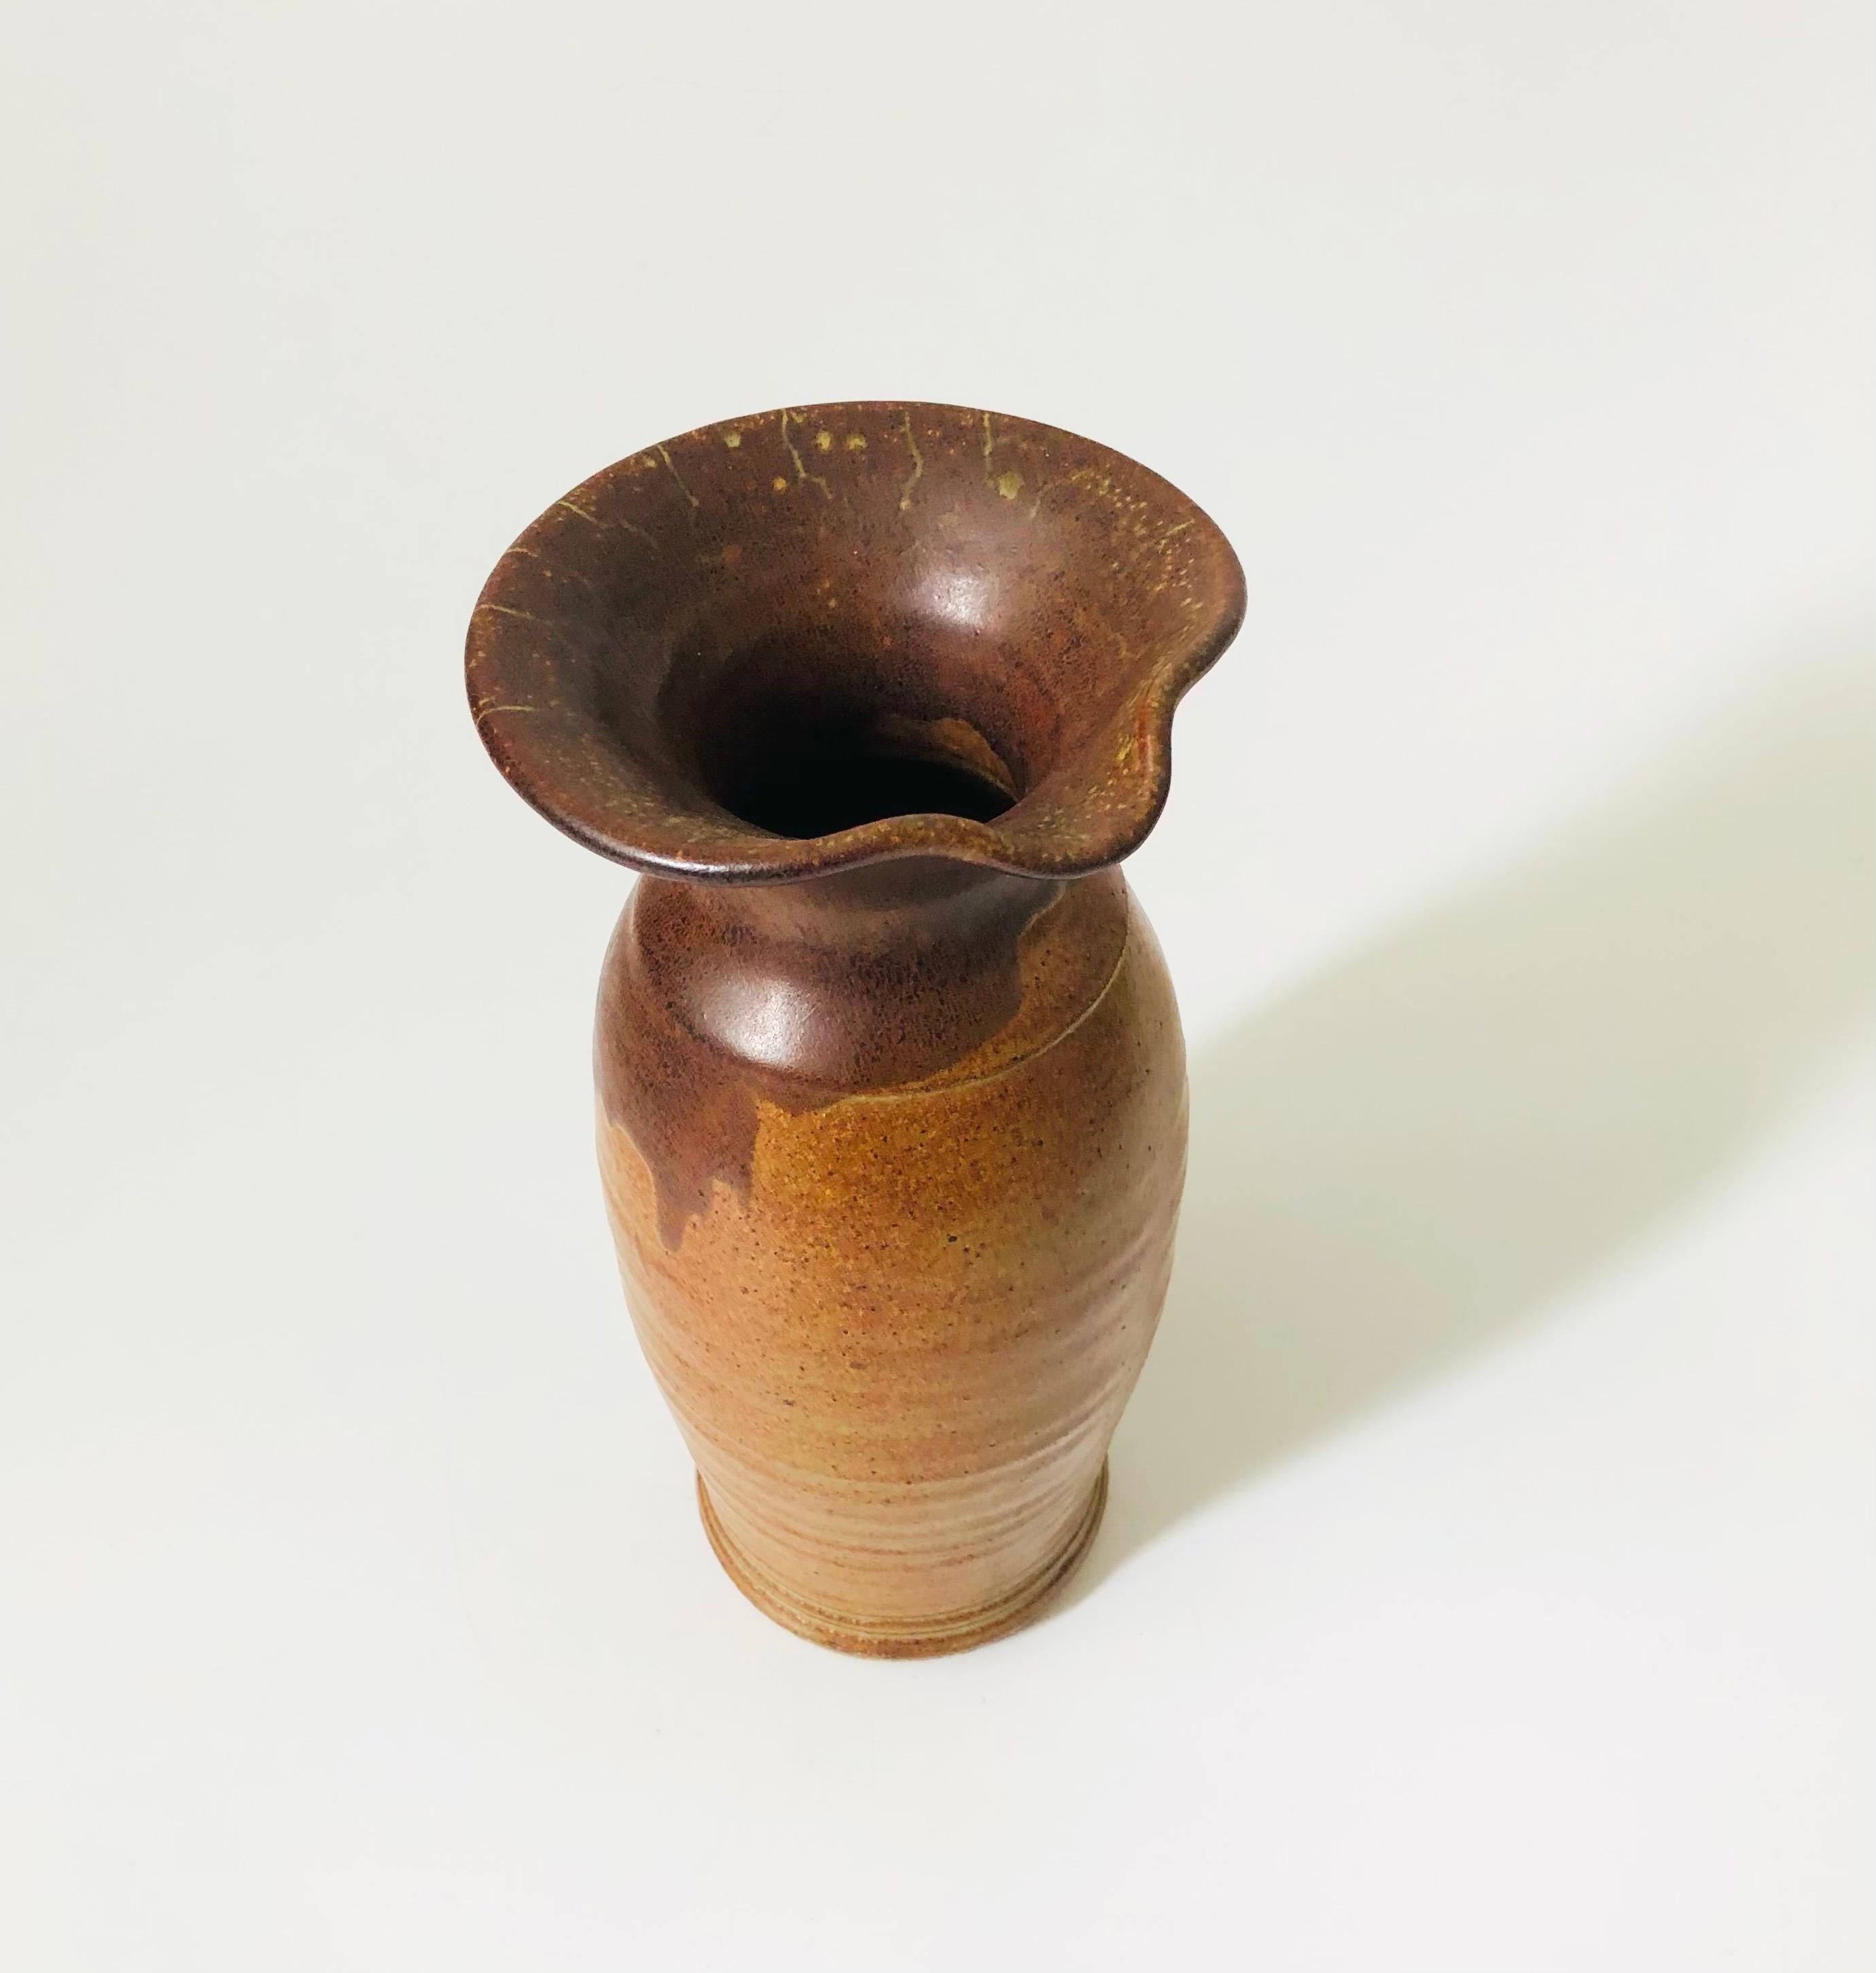 A tall vintage studio pottery pitcher vase. Two tone earthy brown glazes. A spout has been formed on one side of the opening.

